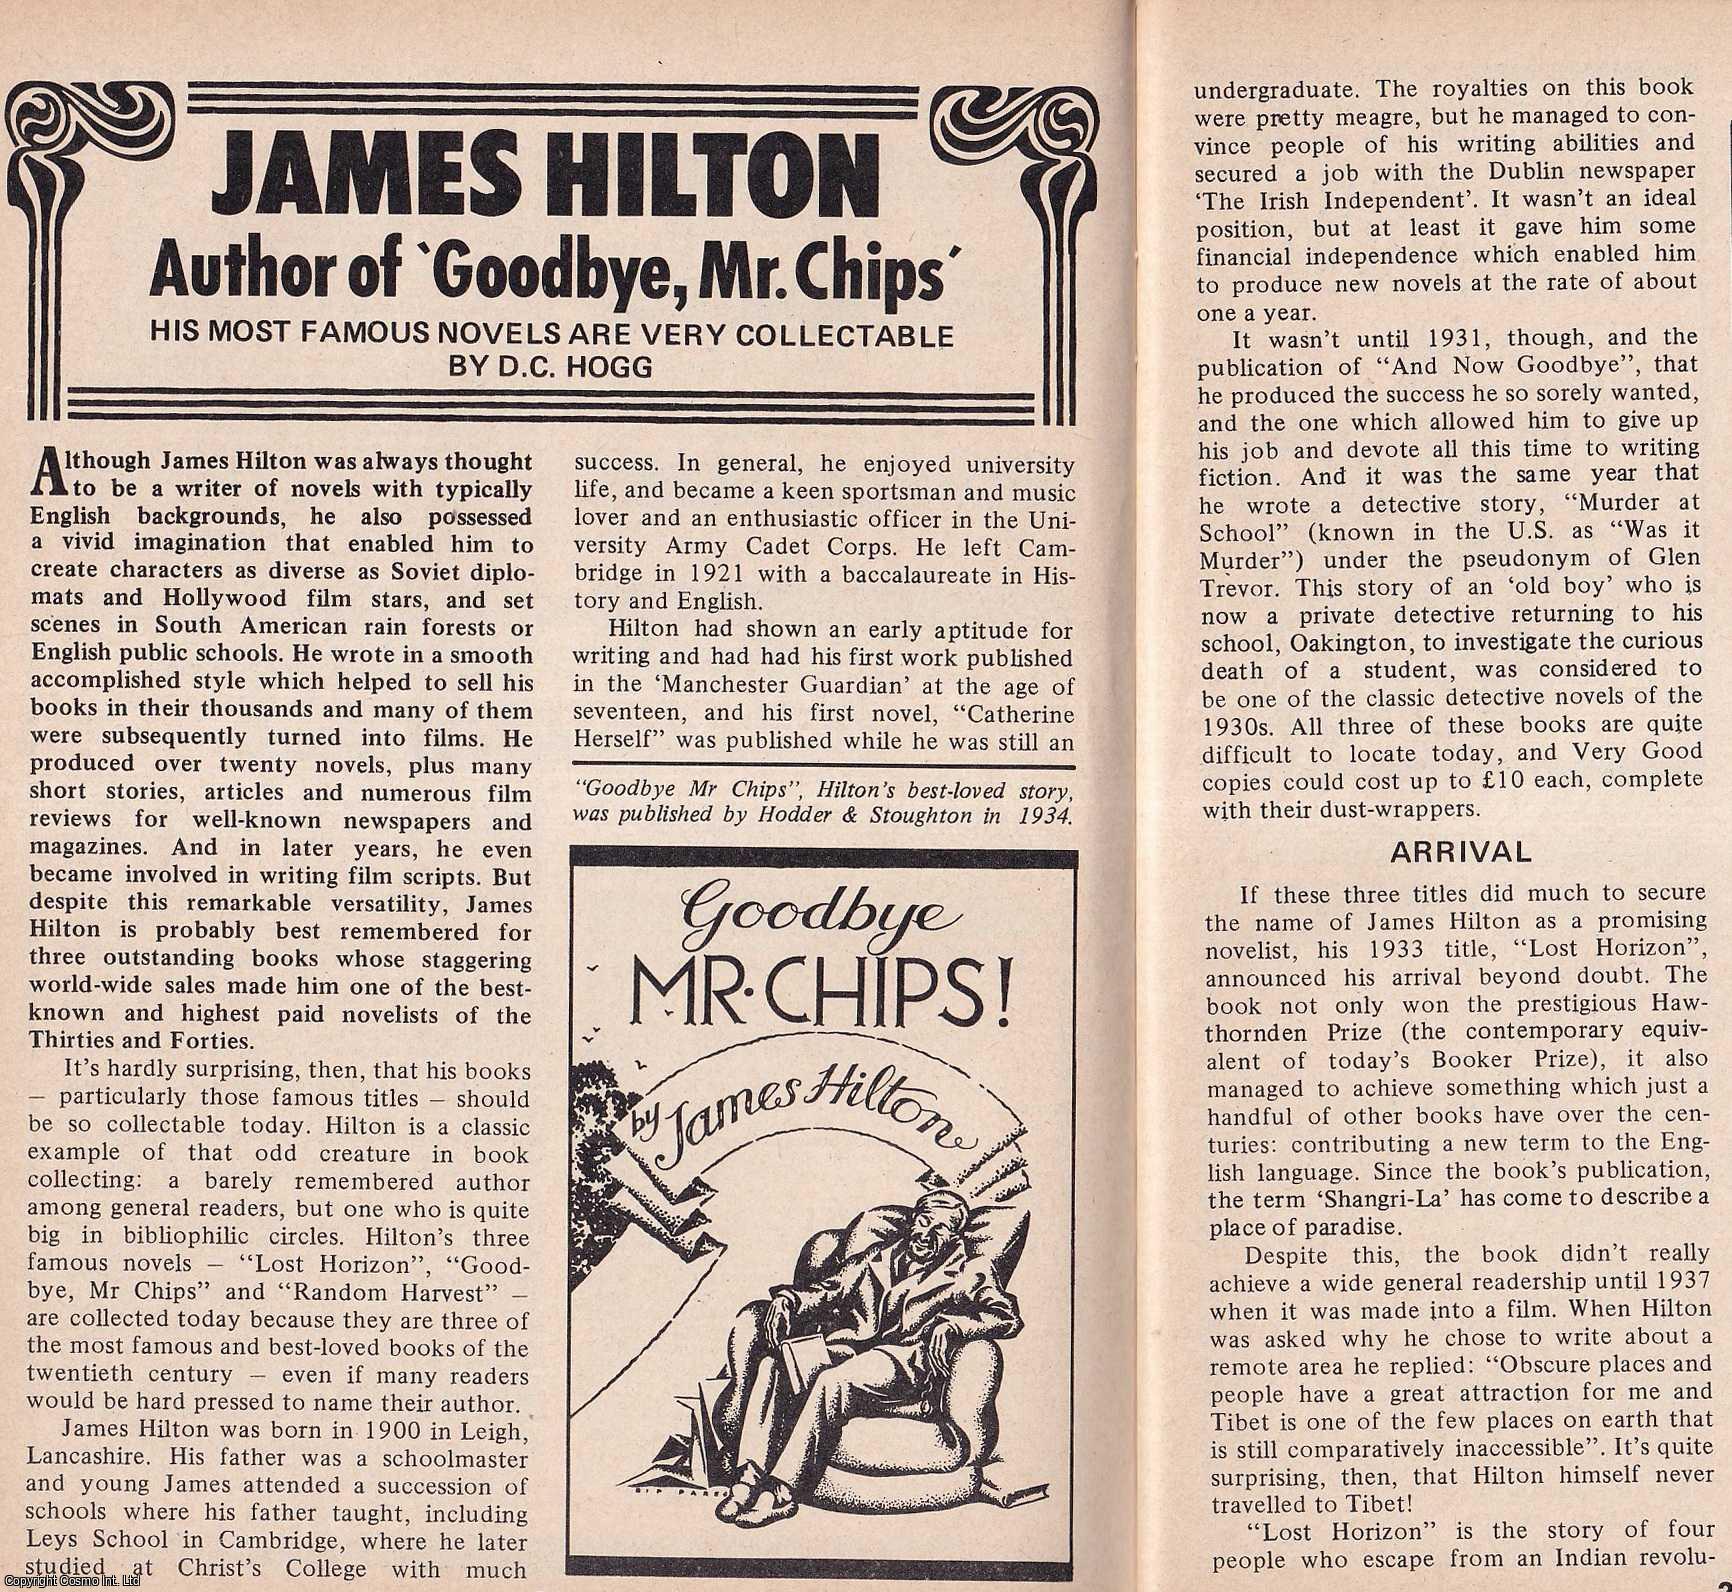 D. C. Hogg - James Hilton. Author of Goodbye, Mr. Chips. This is an original article separated from an issue of The Book & Magazine Collector publication.